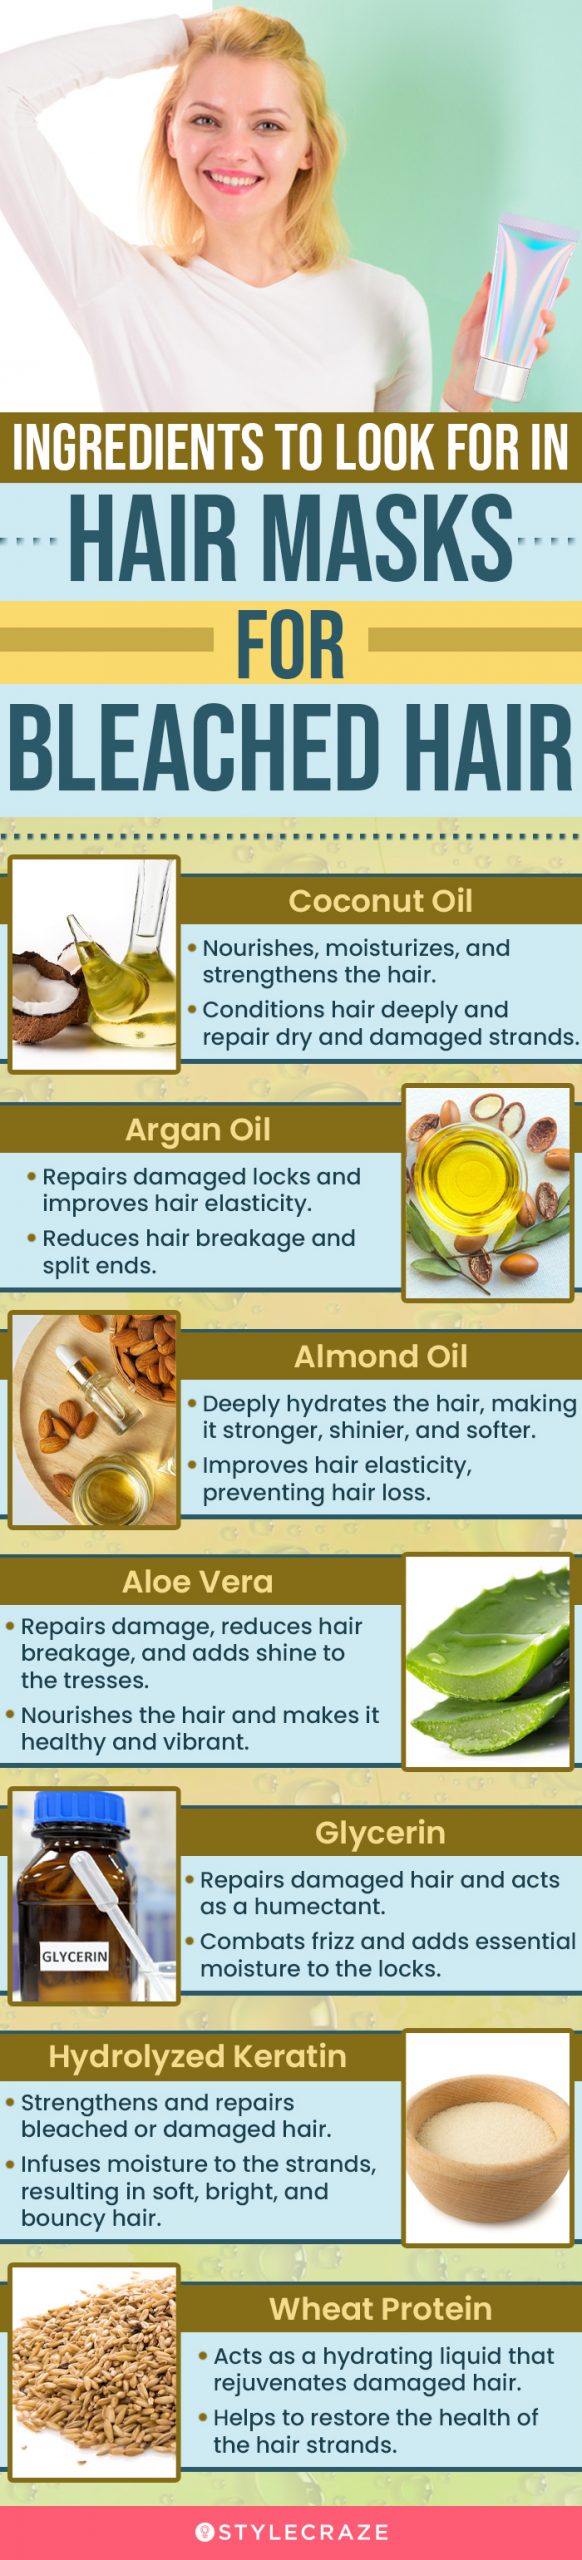 Ingredients To Look For In Hair Masks For Bleached Hair (infographic)